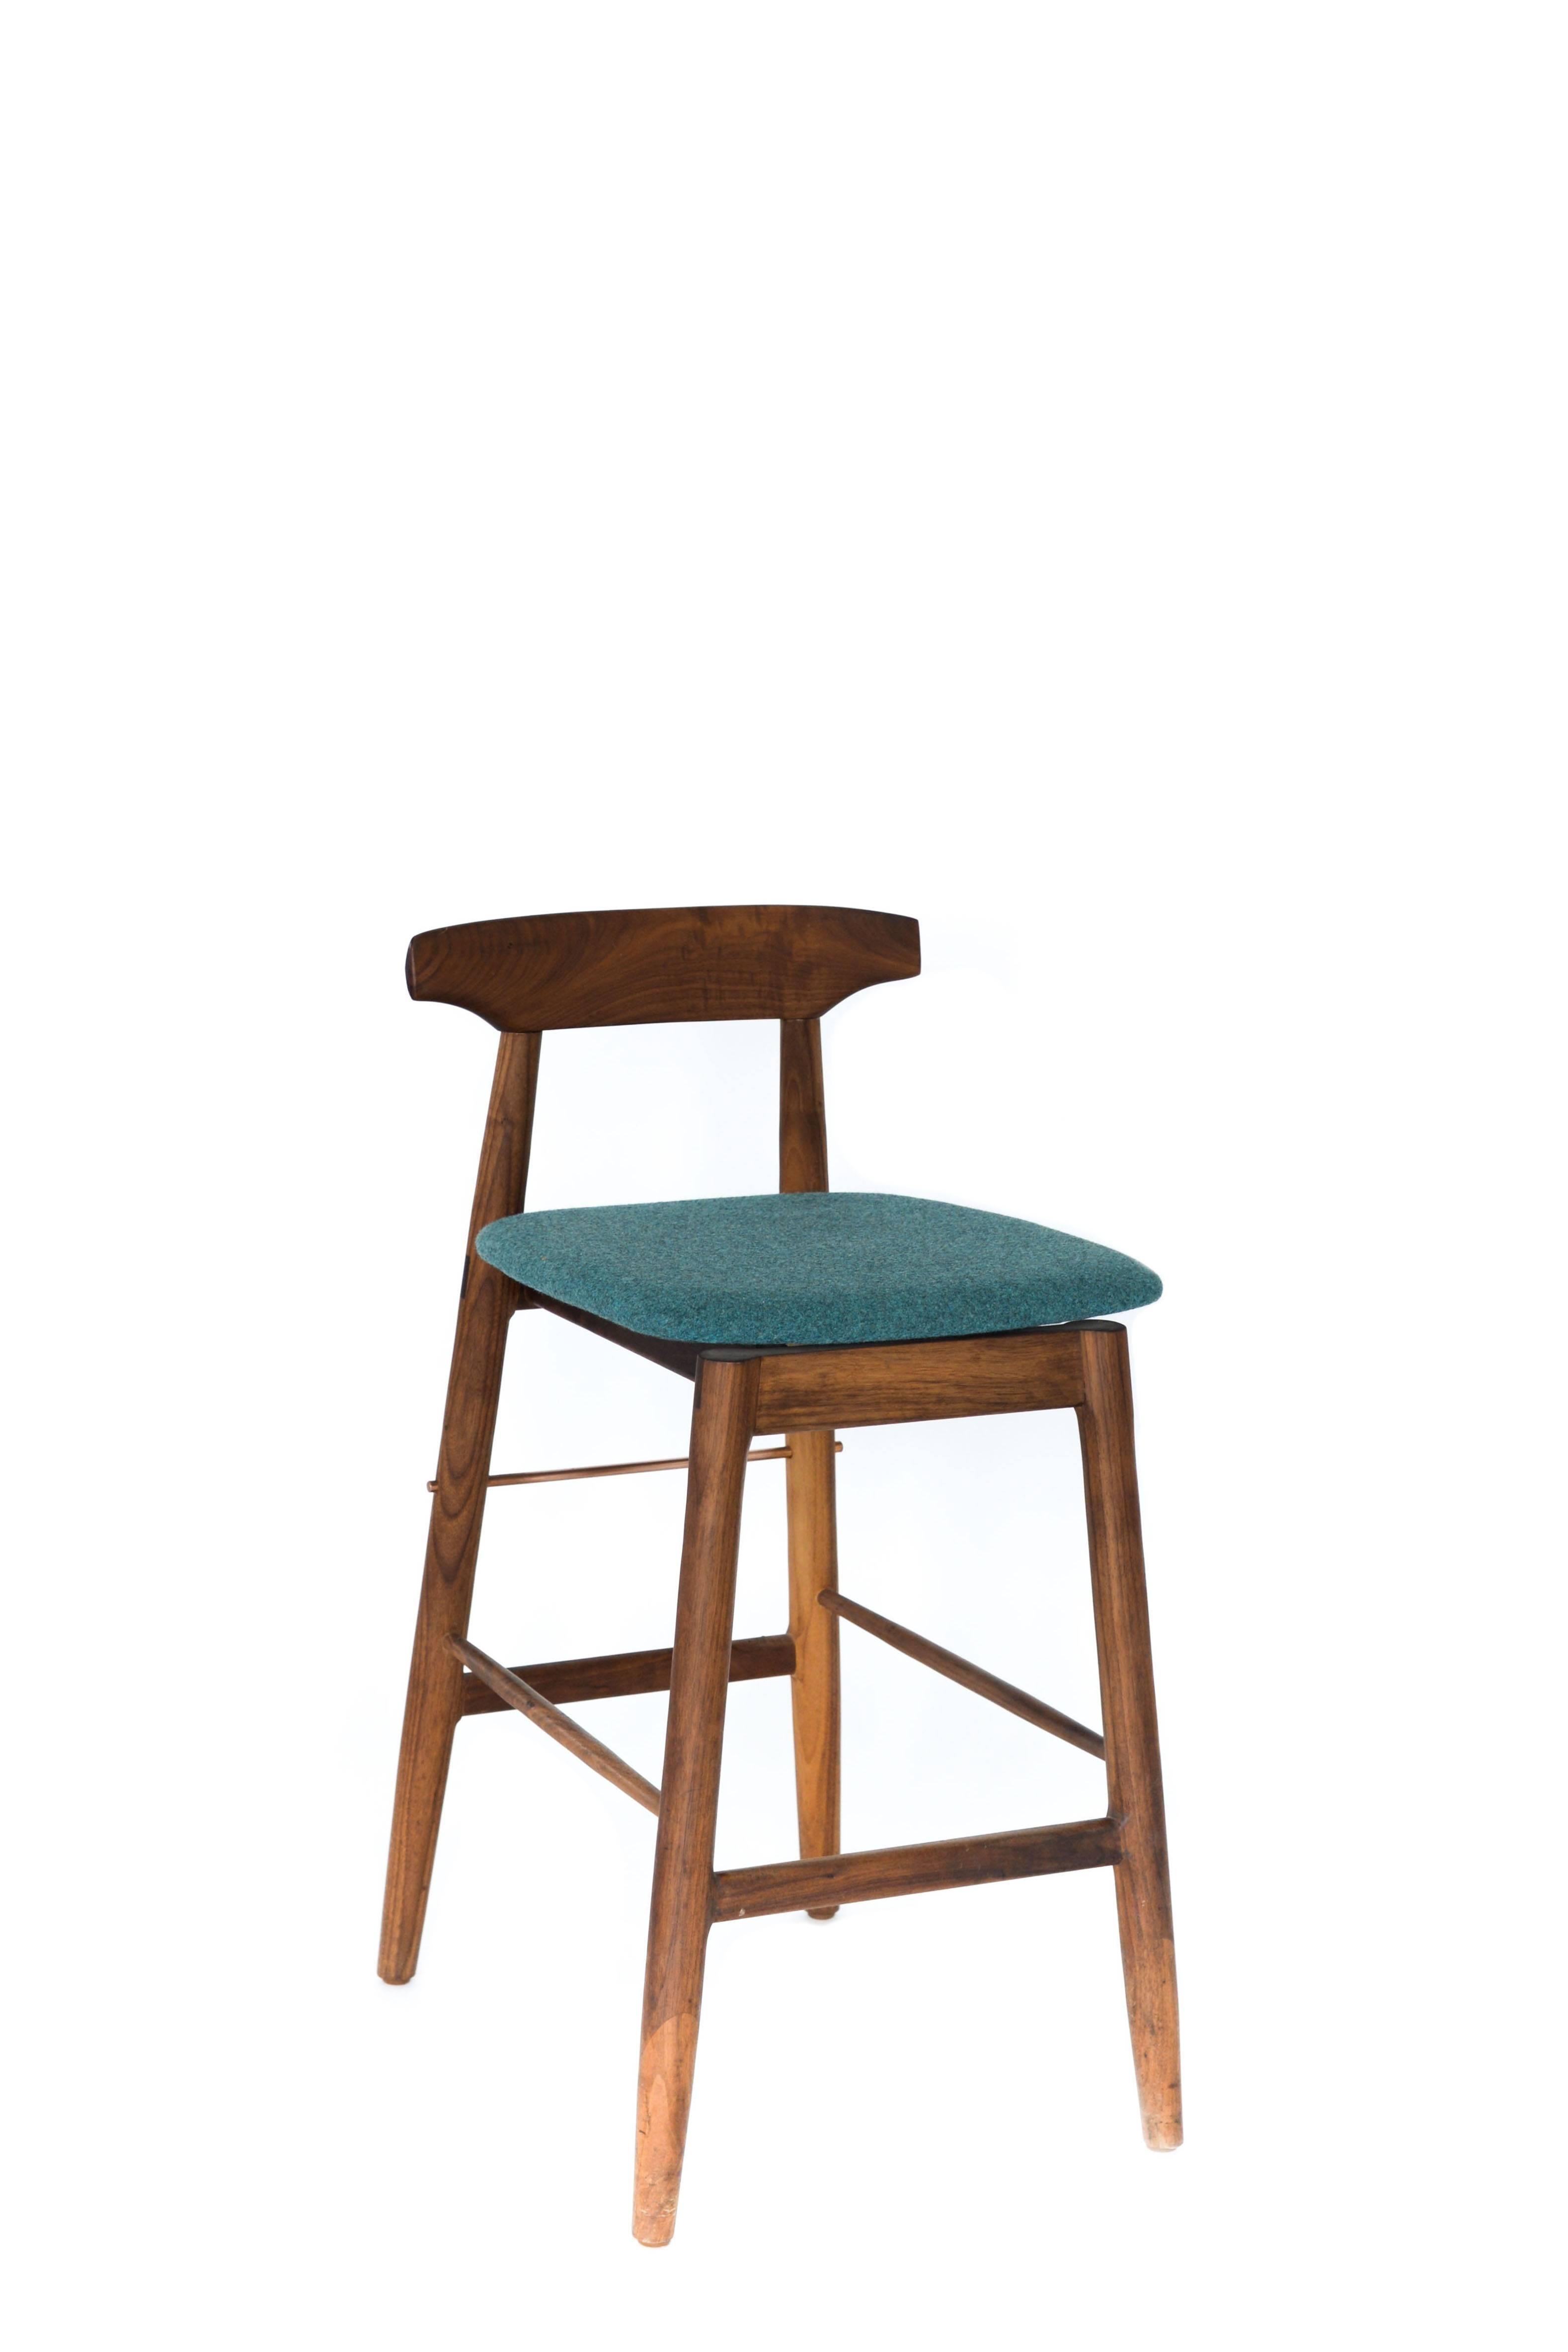 Mid-Century Modern Walnut and Copper Wood High Stool with Custom Teal Felt Upholstery For Sale